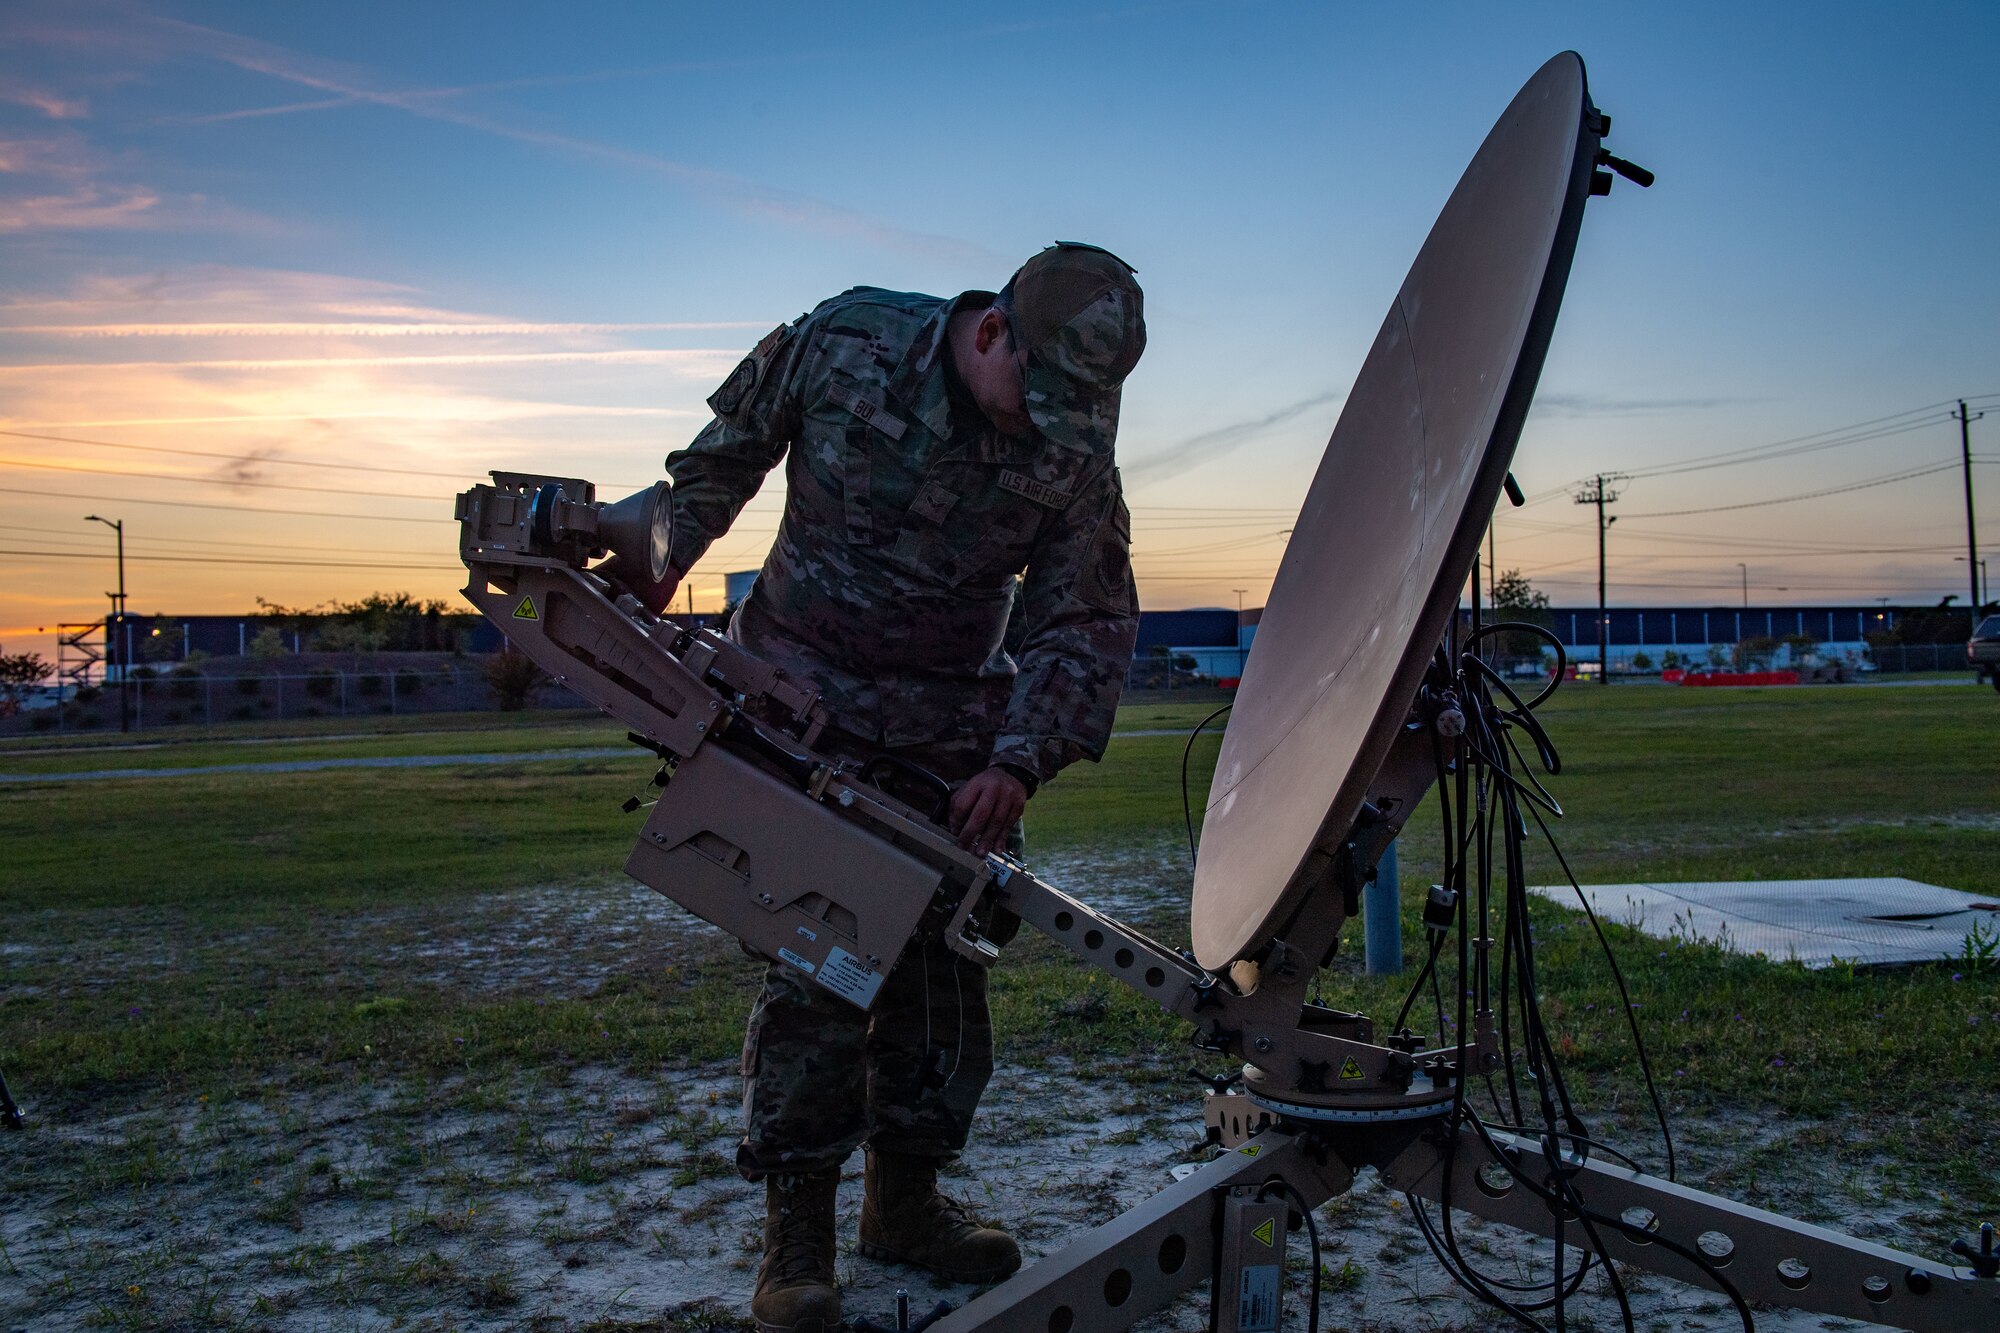 U.S. Air Force Airman 1st Class Bui Bryant, 52nd Combat Communication Squadron radio frequency operator, sets up an airbus 1.2 antenna during Exercise Ready Tiger 24-1 at Savannah Air National Guard Base Georgia, April 8, 2024. Built upon Air Combat Command's directive to assert air power in contested environments, Exercise Ready Tiger 24-1 aims to test and enhance the 23rd Wing’s proficiency in executing Lead Wing and Expeditionary Air Base concepts through Agile Combat Employment and command and control operations. (U.S. Air Force photo by Senior Airman Courtney Sebastianelli)